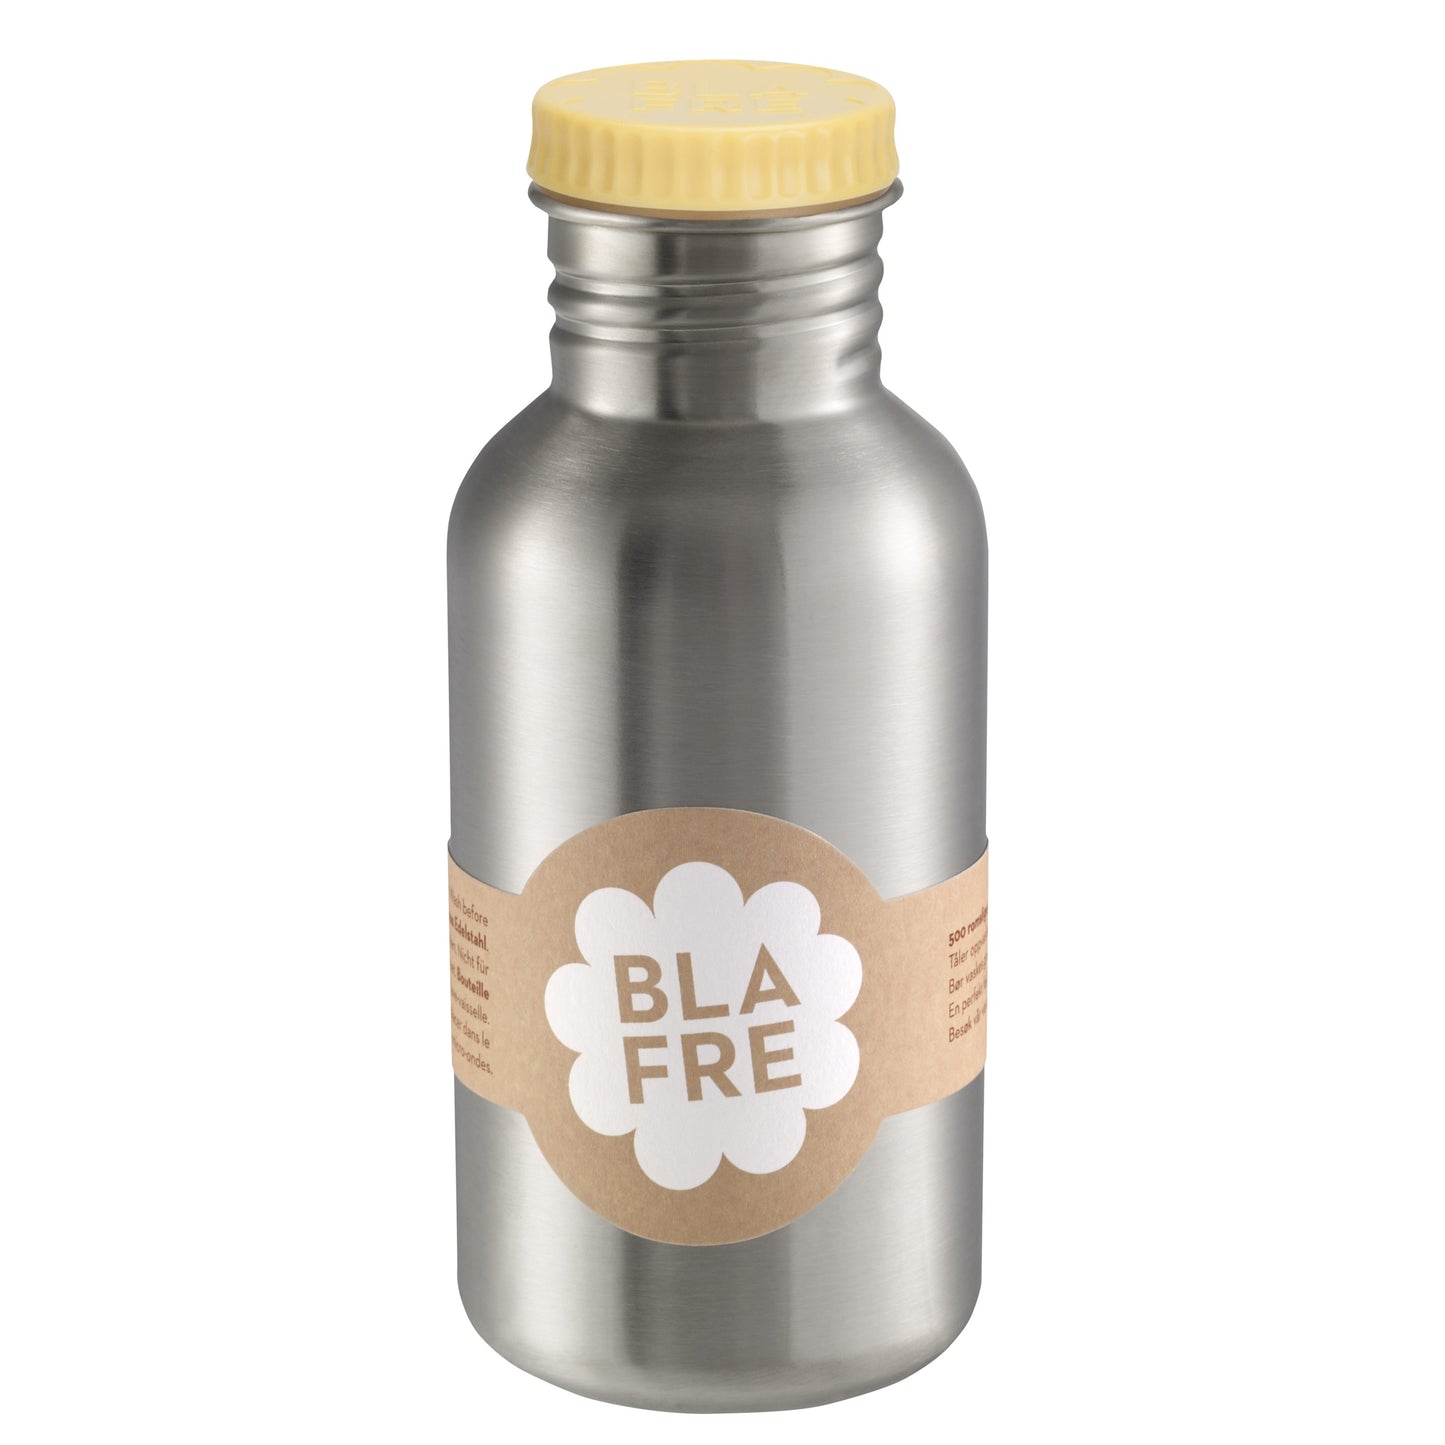 Blafre drinking bottle 500ml with light yellow lid